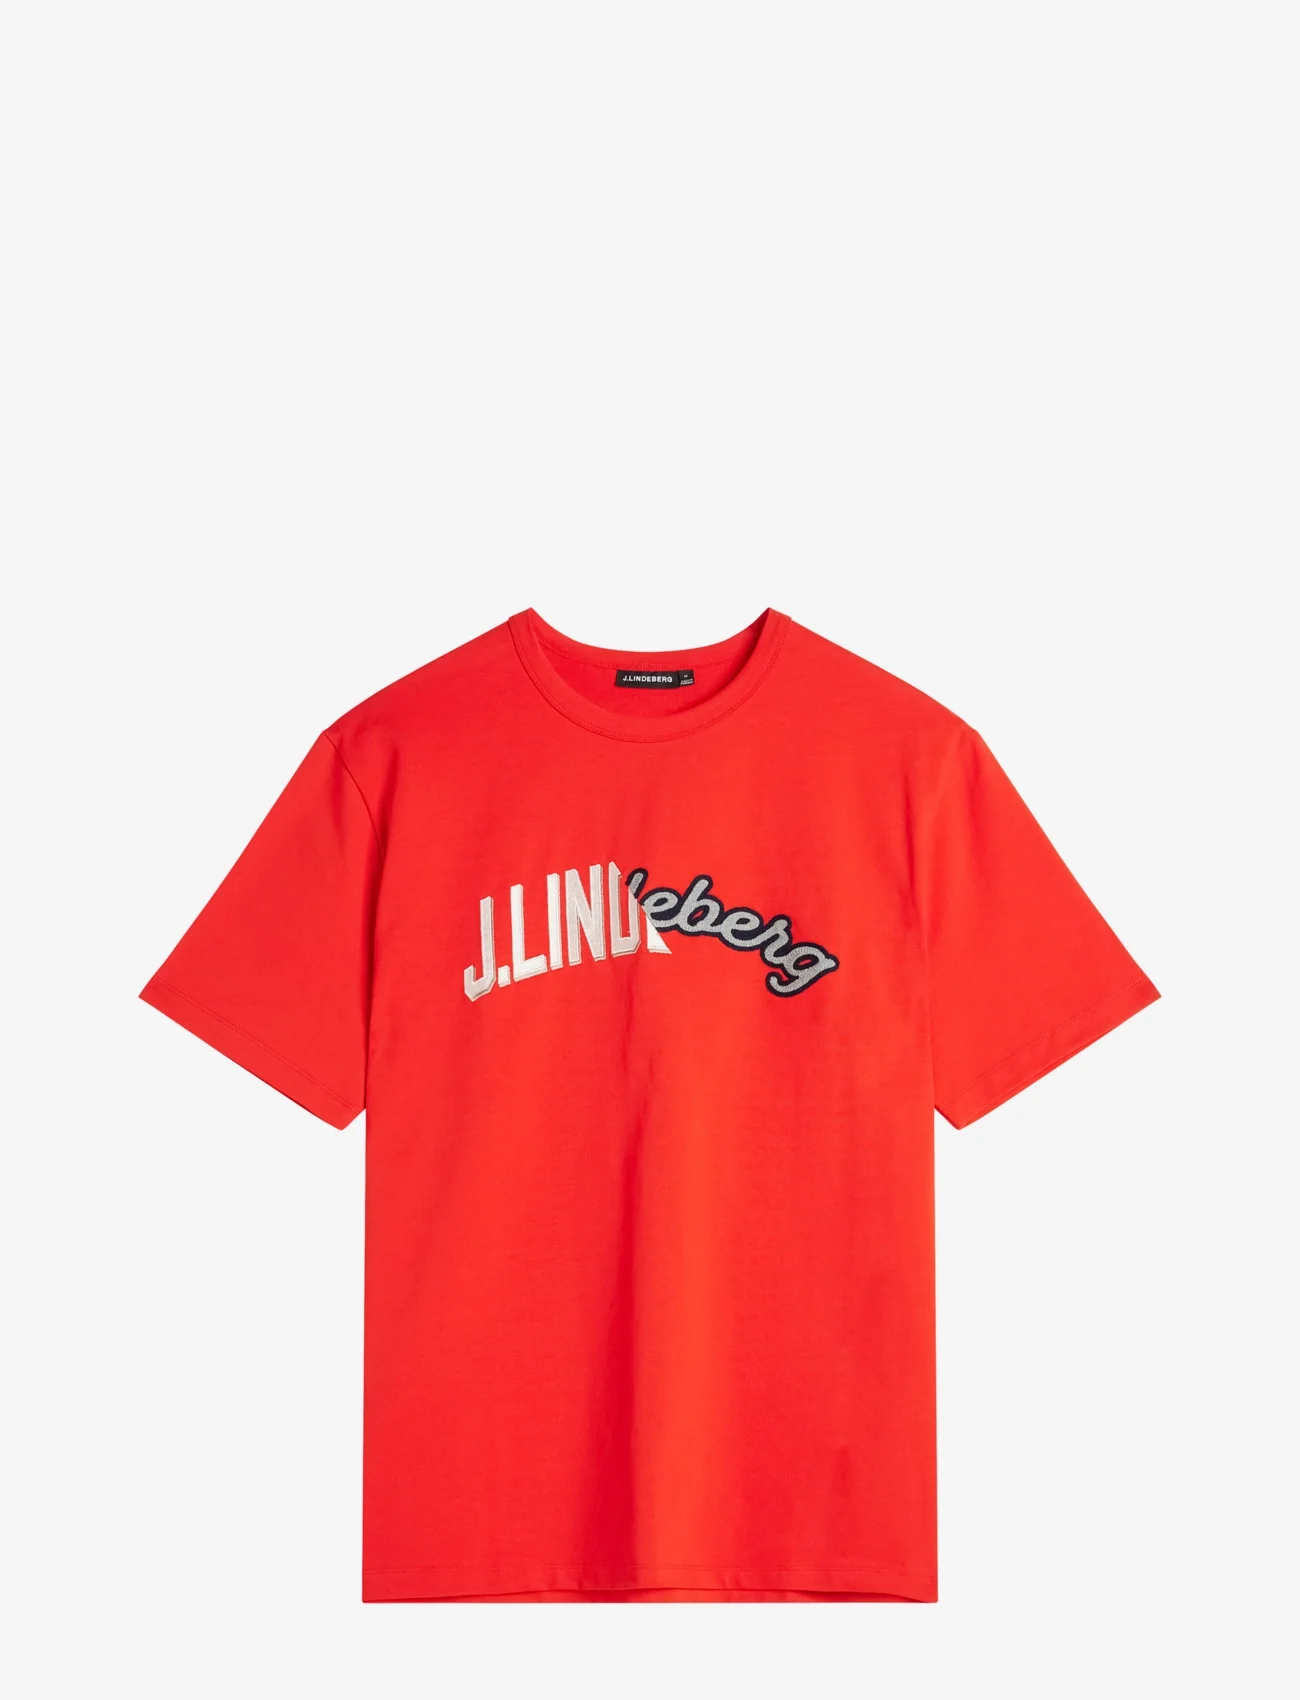 J. Lindeberg - Camilo Graphic T-shirt - fiery red - 1